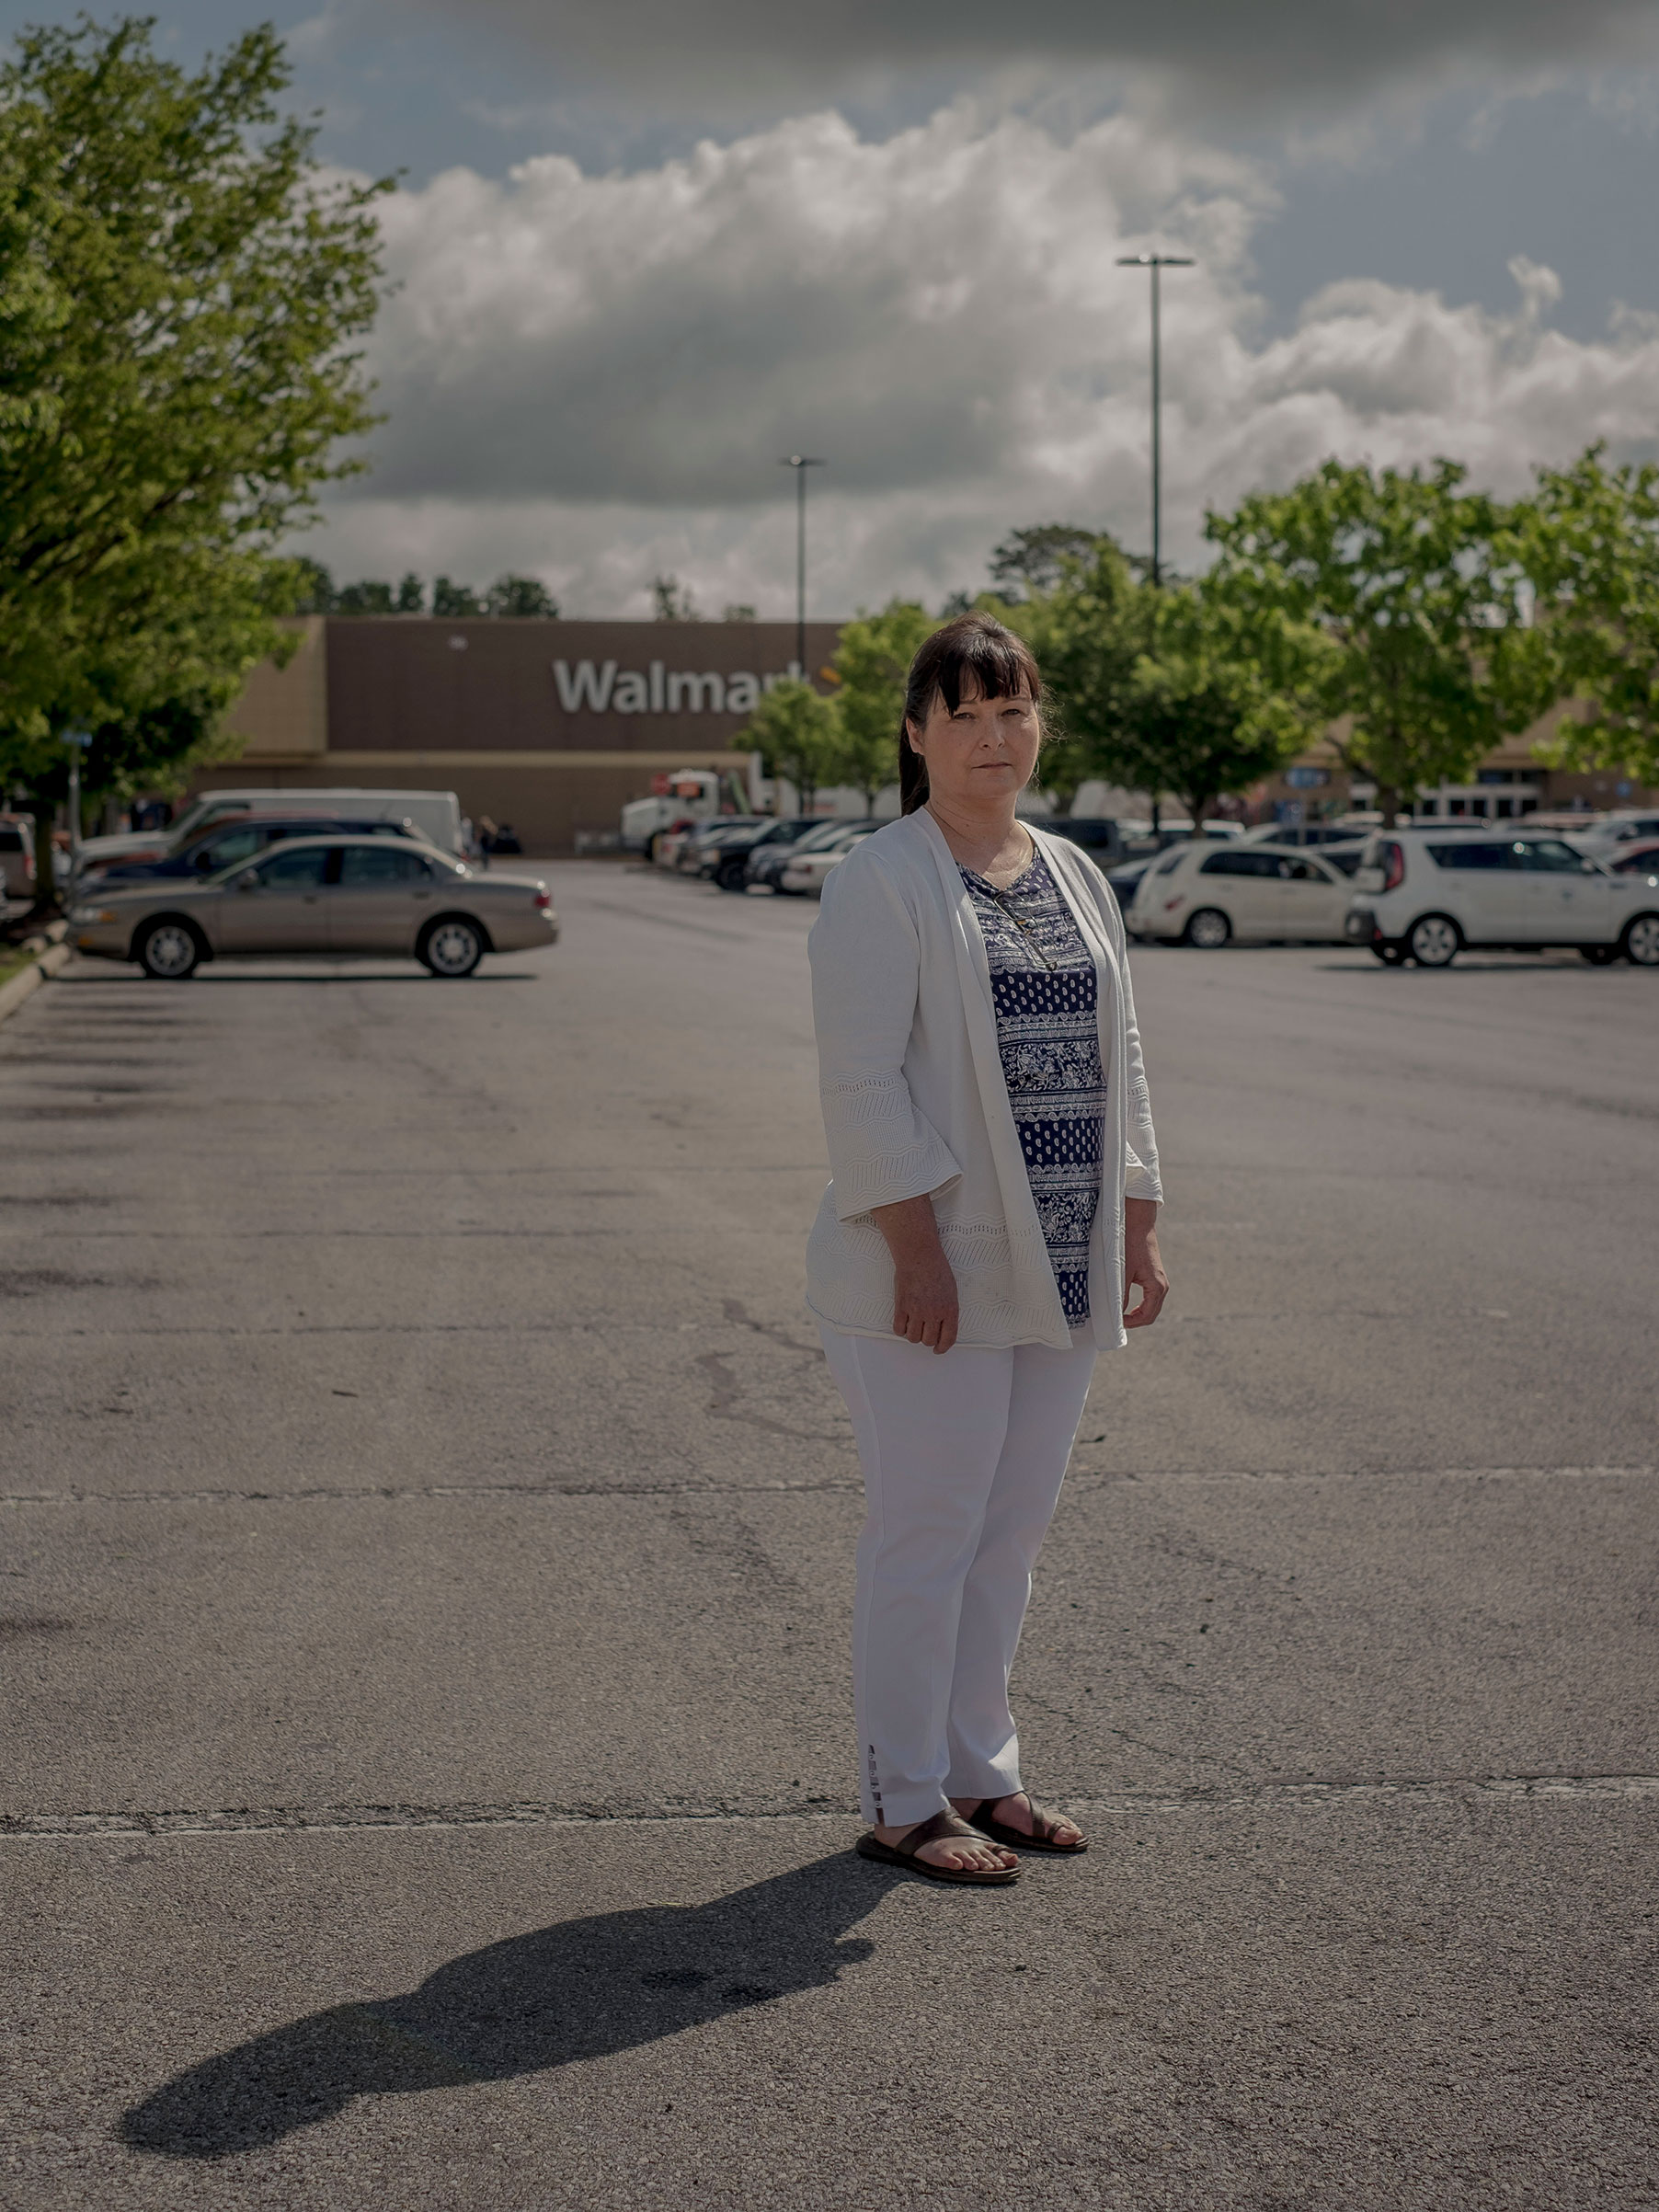 In a lawsuit filed against Walmart this month, Stephanie Chapman alleges that she was paid less than men in similar positions